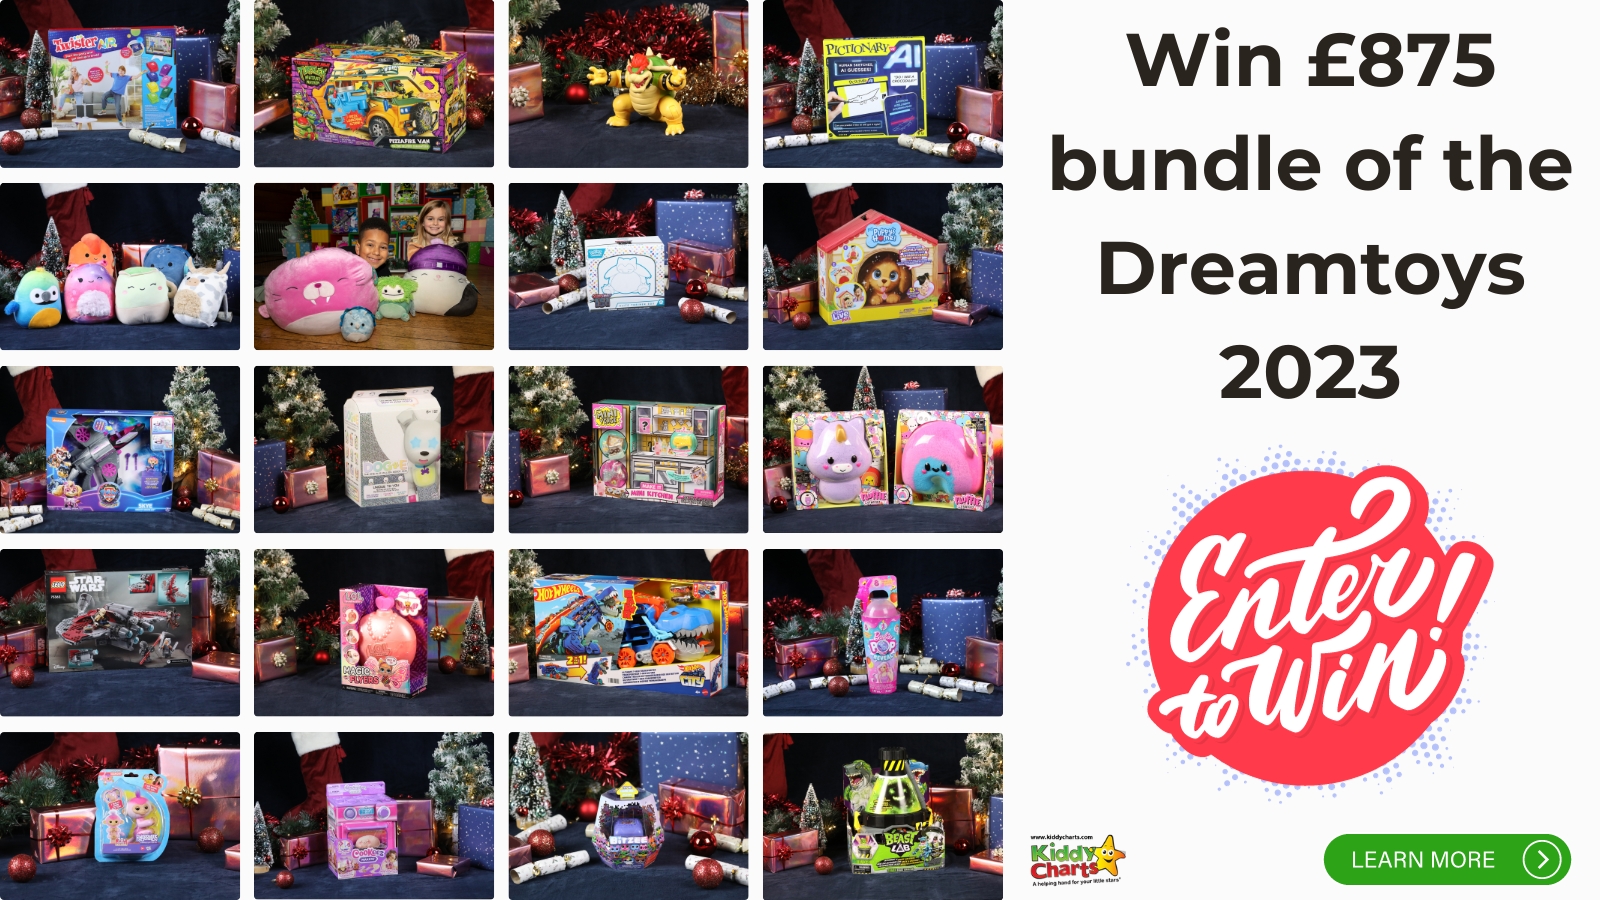 Win £875 Dreamtoys 2023 toy bundle to get your family Christmas sorted